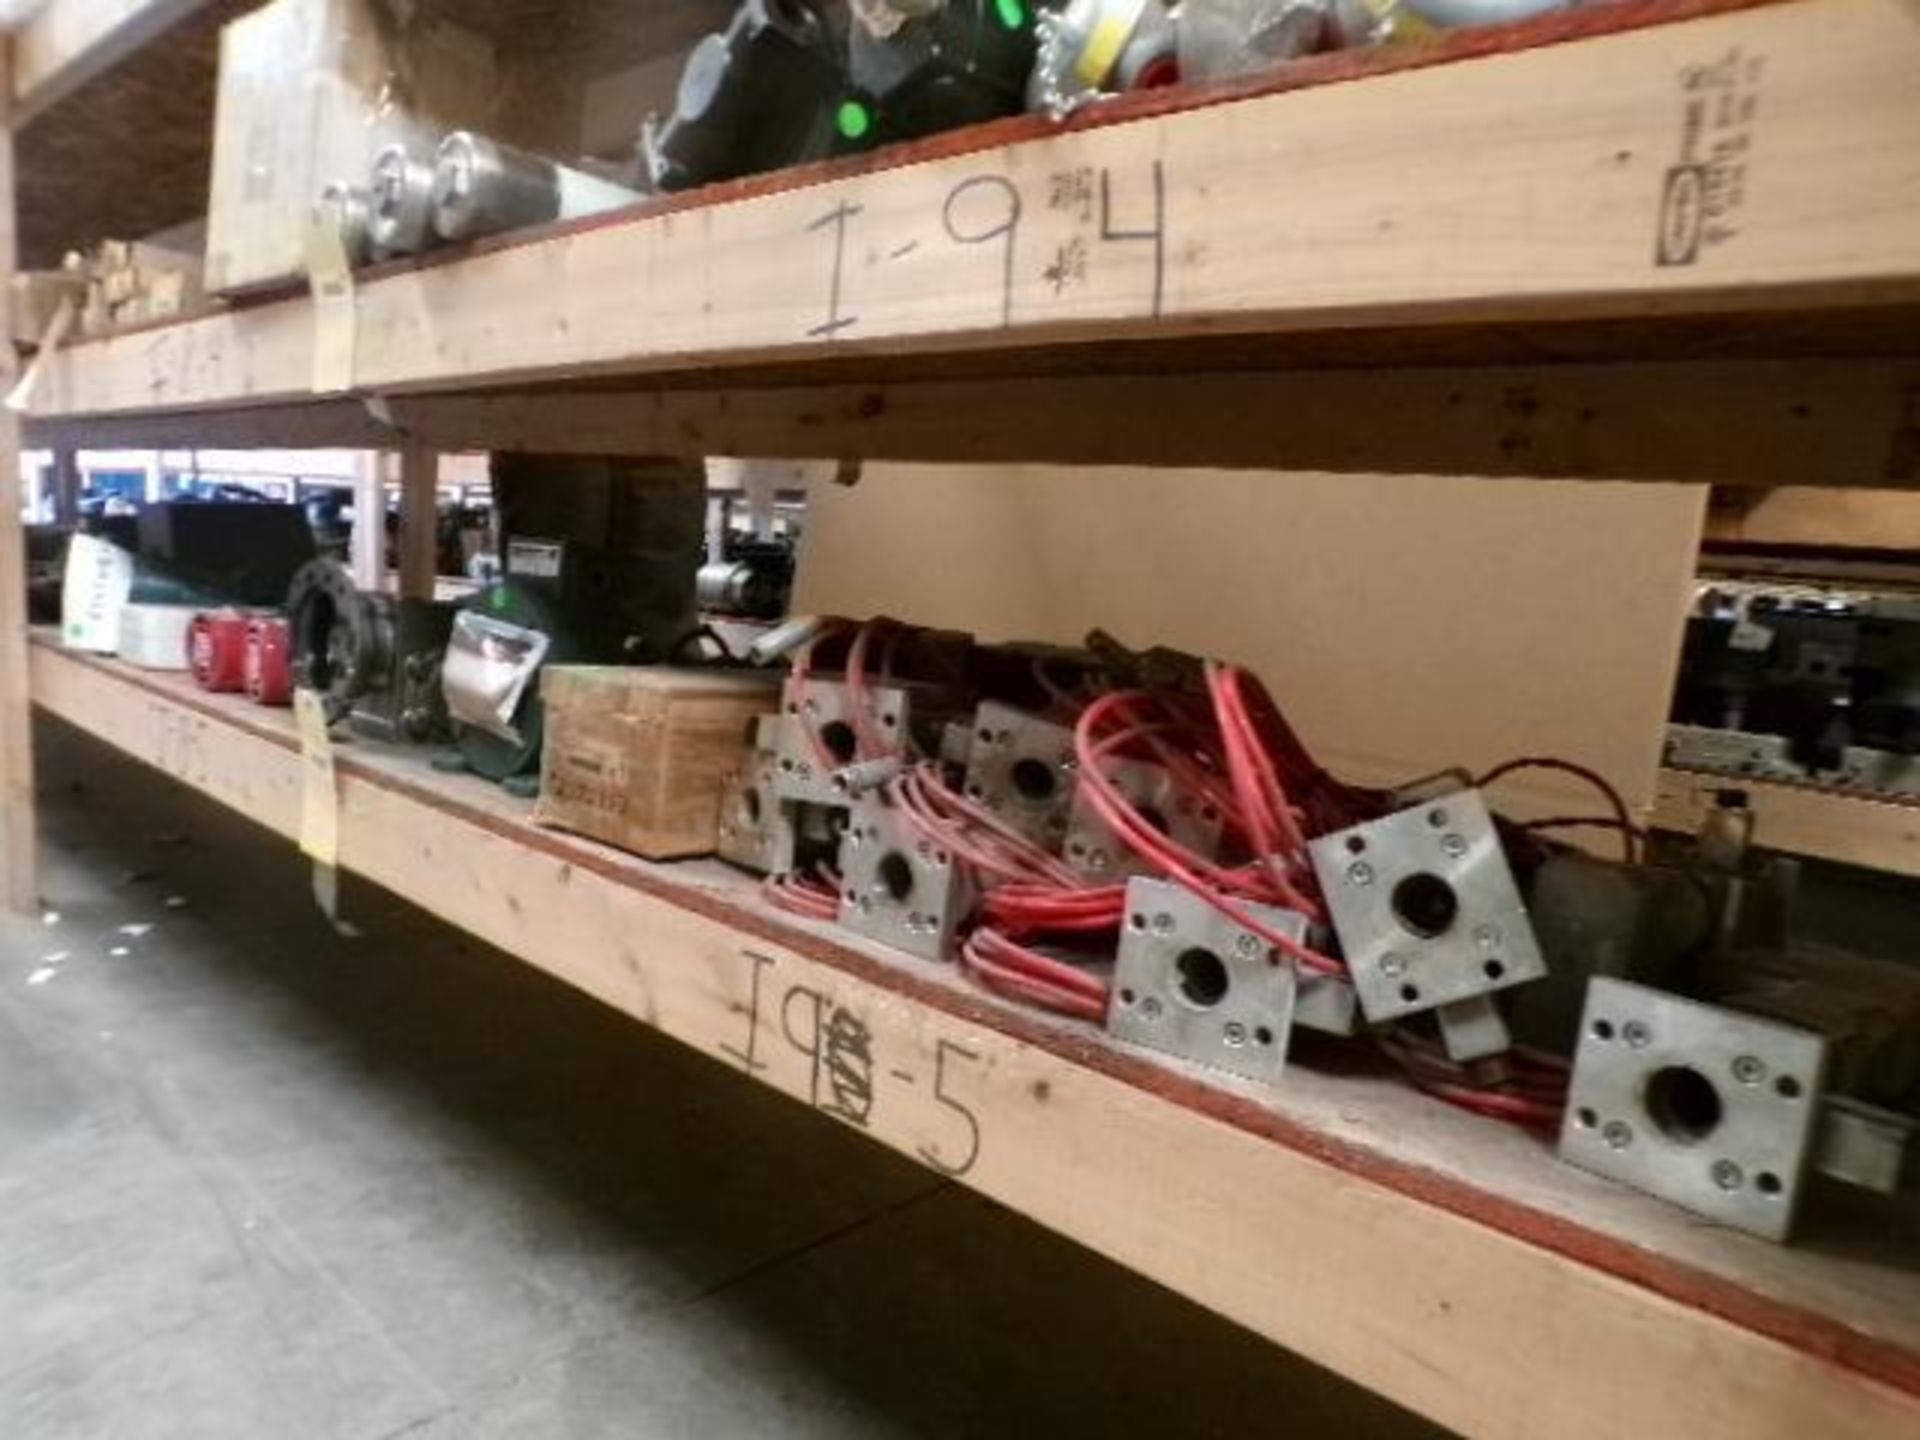 Contents of Shelf I-8-5-I-9-5; Electric Motors, Hydraulic Pump, Gearbox, Vogt Valves, Vibco, Foxboro - Image 3 of 11